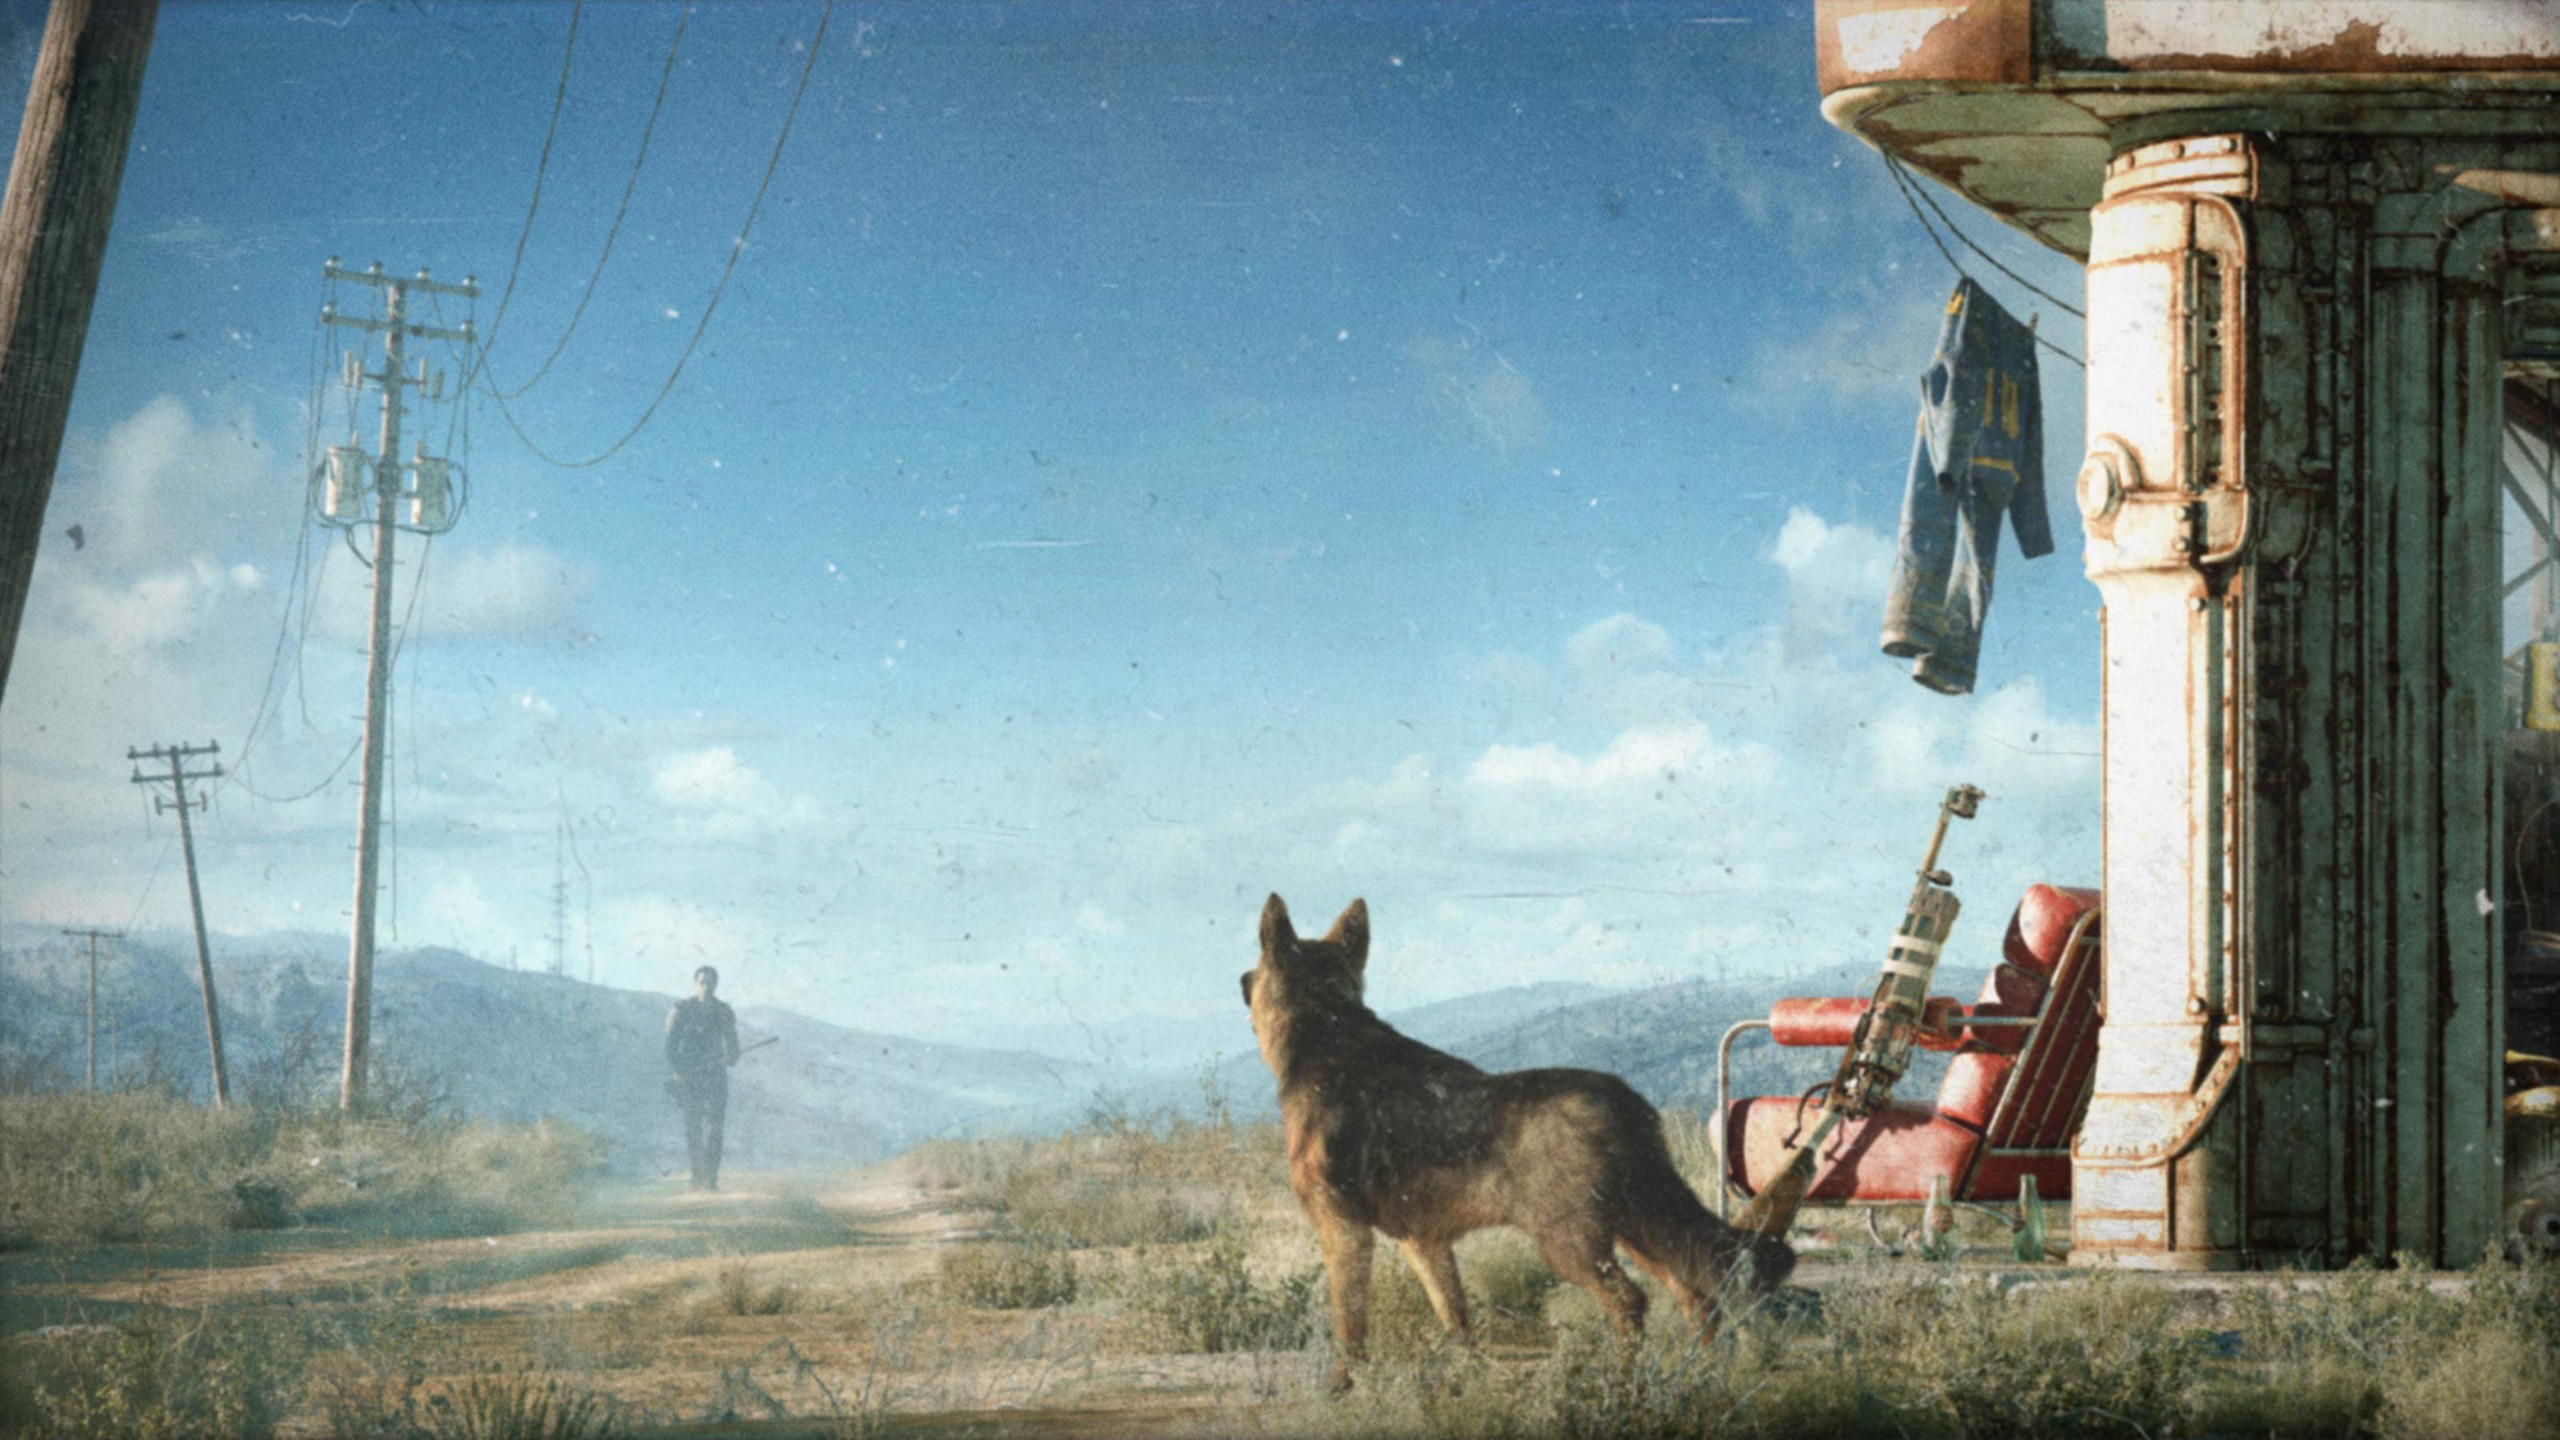 Fallout Video Games Fallout 4 Dogmeat 2560x1440